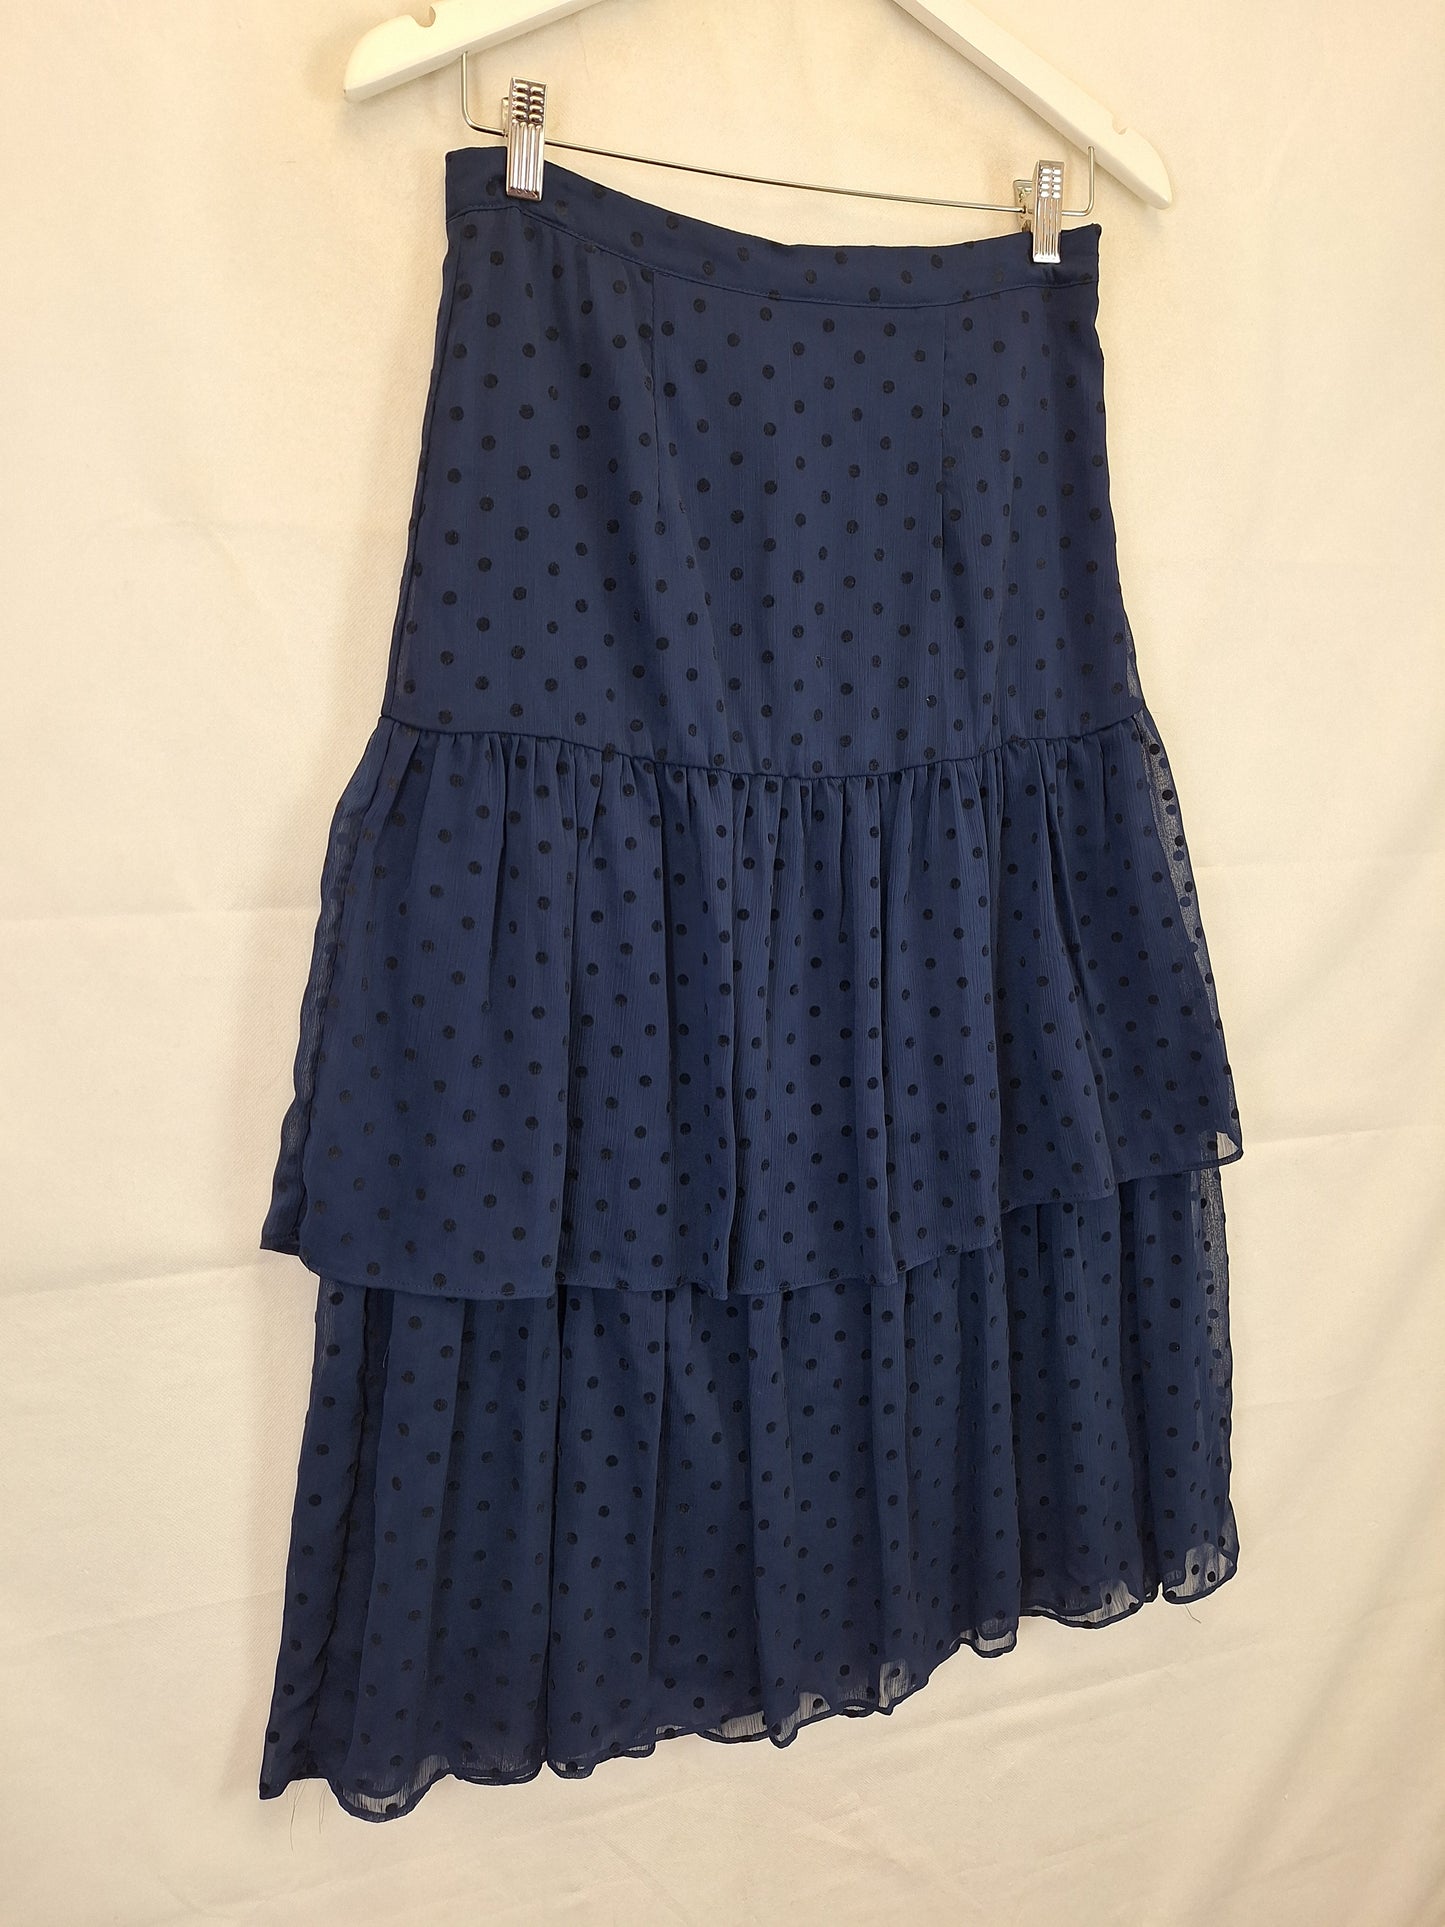 Liz Jordan Classic Polka Dot Tiered Midi Skirt Size 8 by SwapUp-Online Second Hand Store-Online Thrift Store